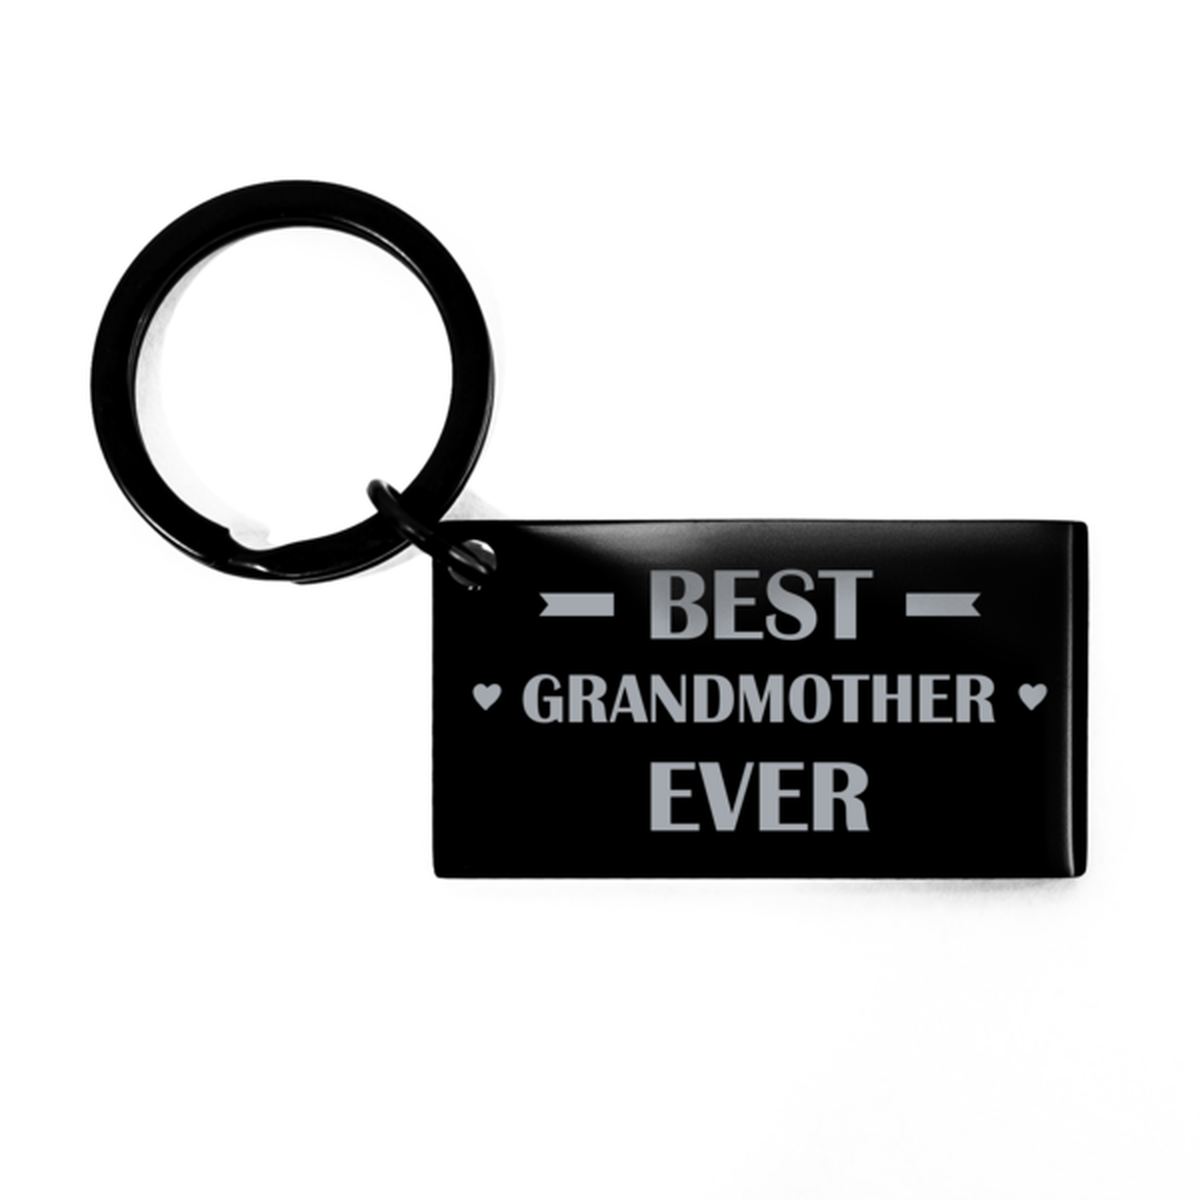 Best Grandmother Ever Grandmother Gifts, Funny Black Keychain For Grandmother, Birthday Engraved Keyring Presents For Women